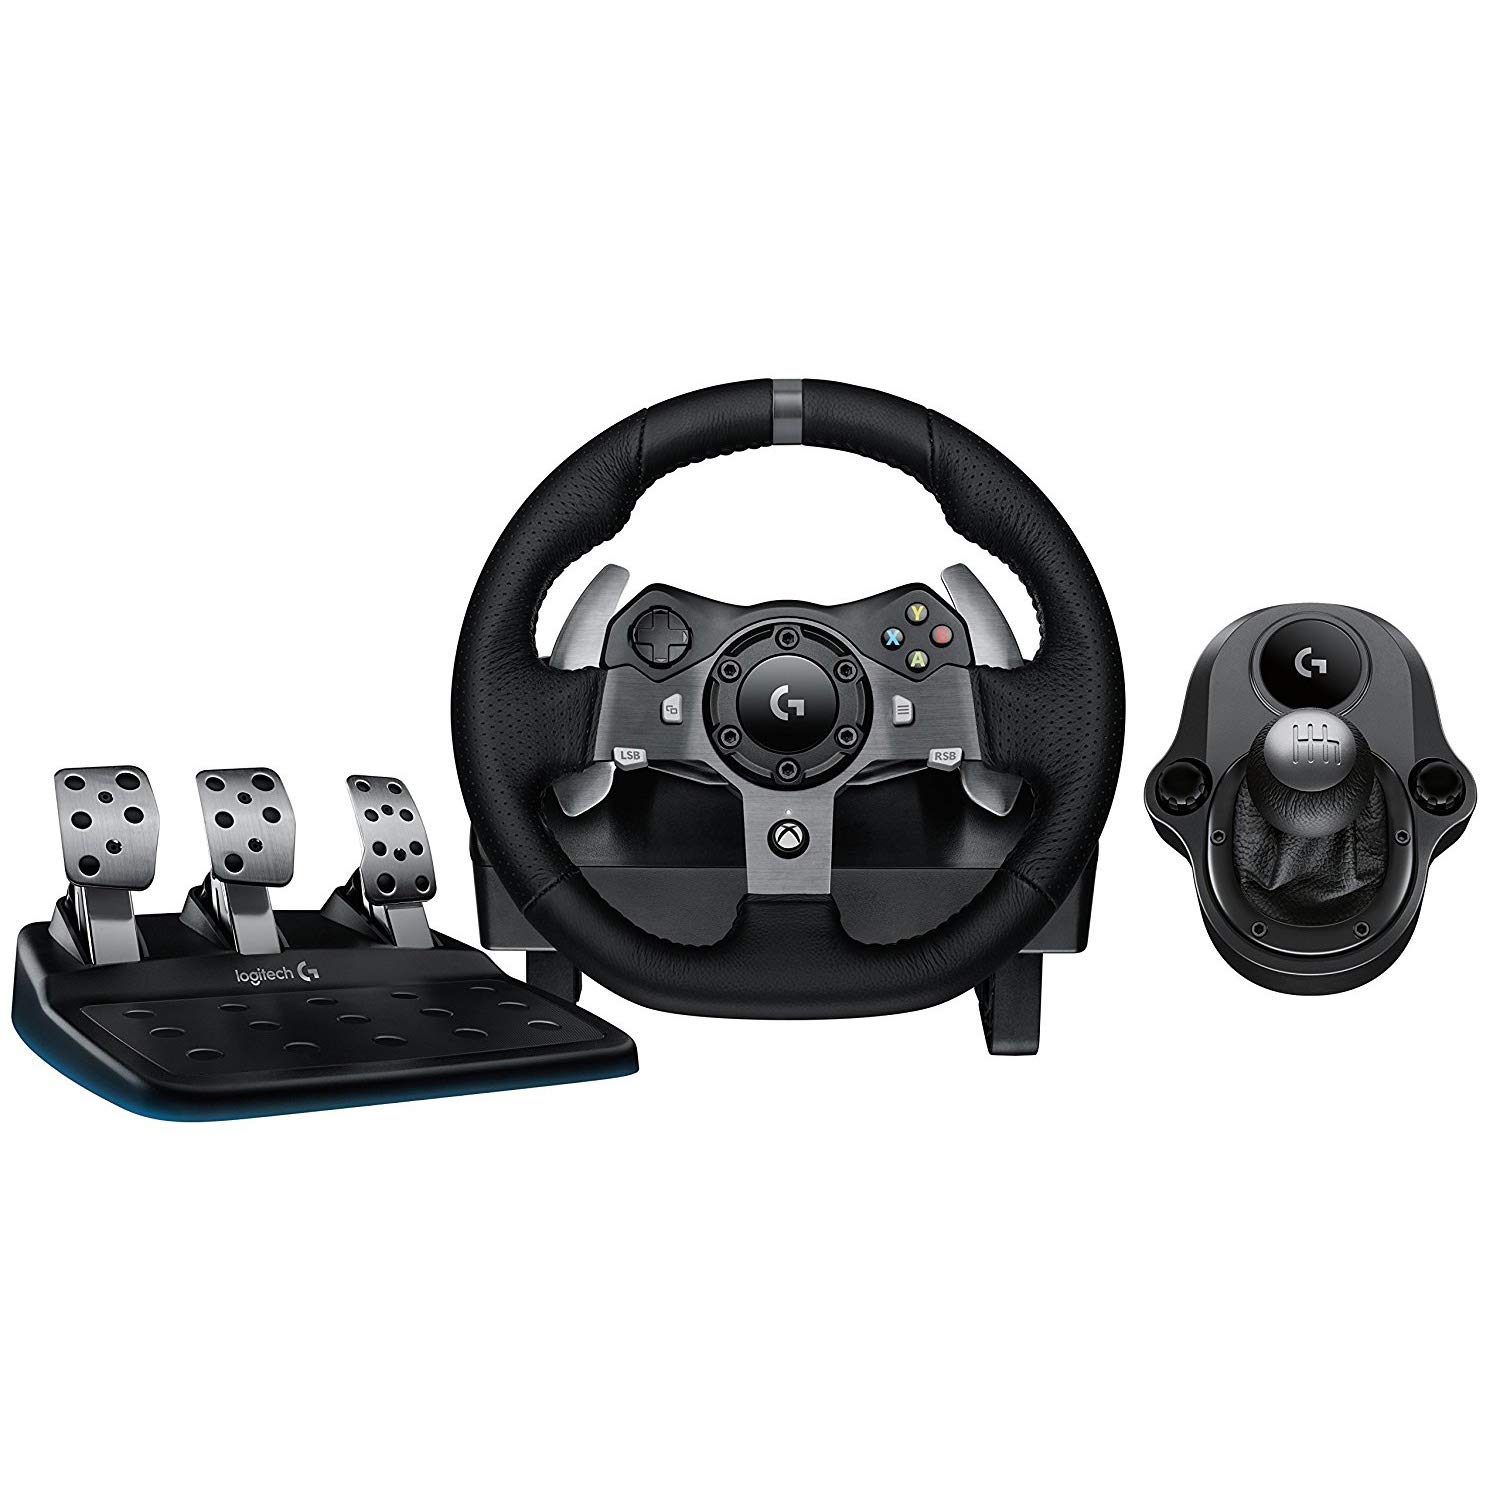 8 Best Logitech G920 Racing Wheel And Shifter for 2023